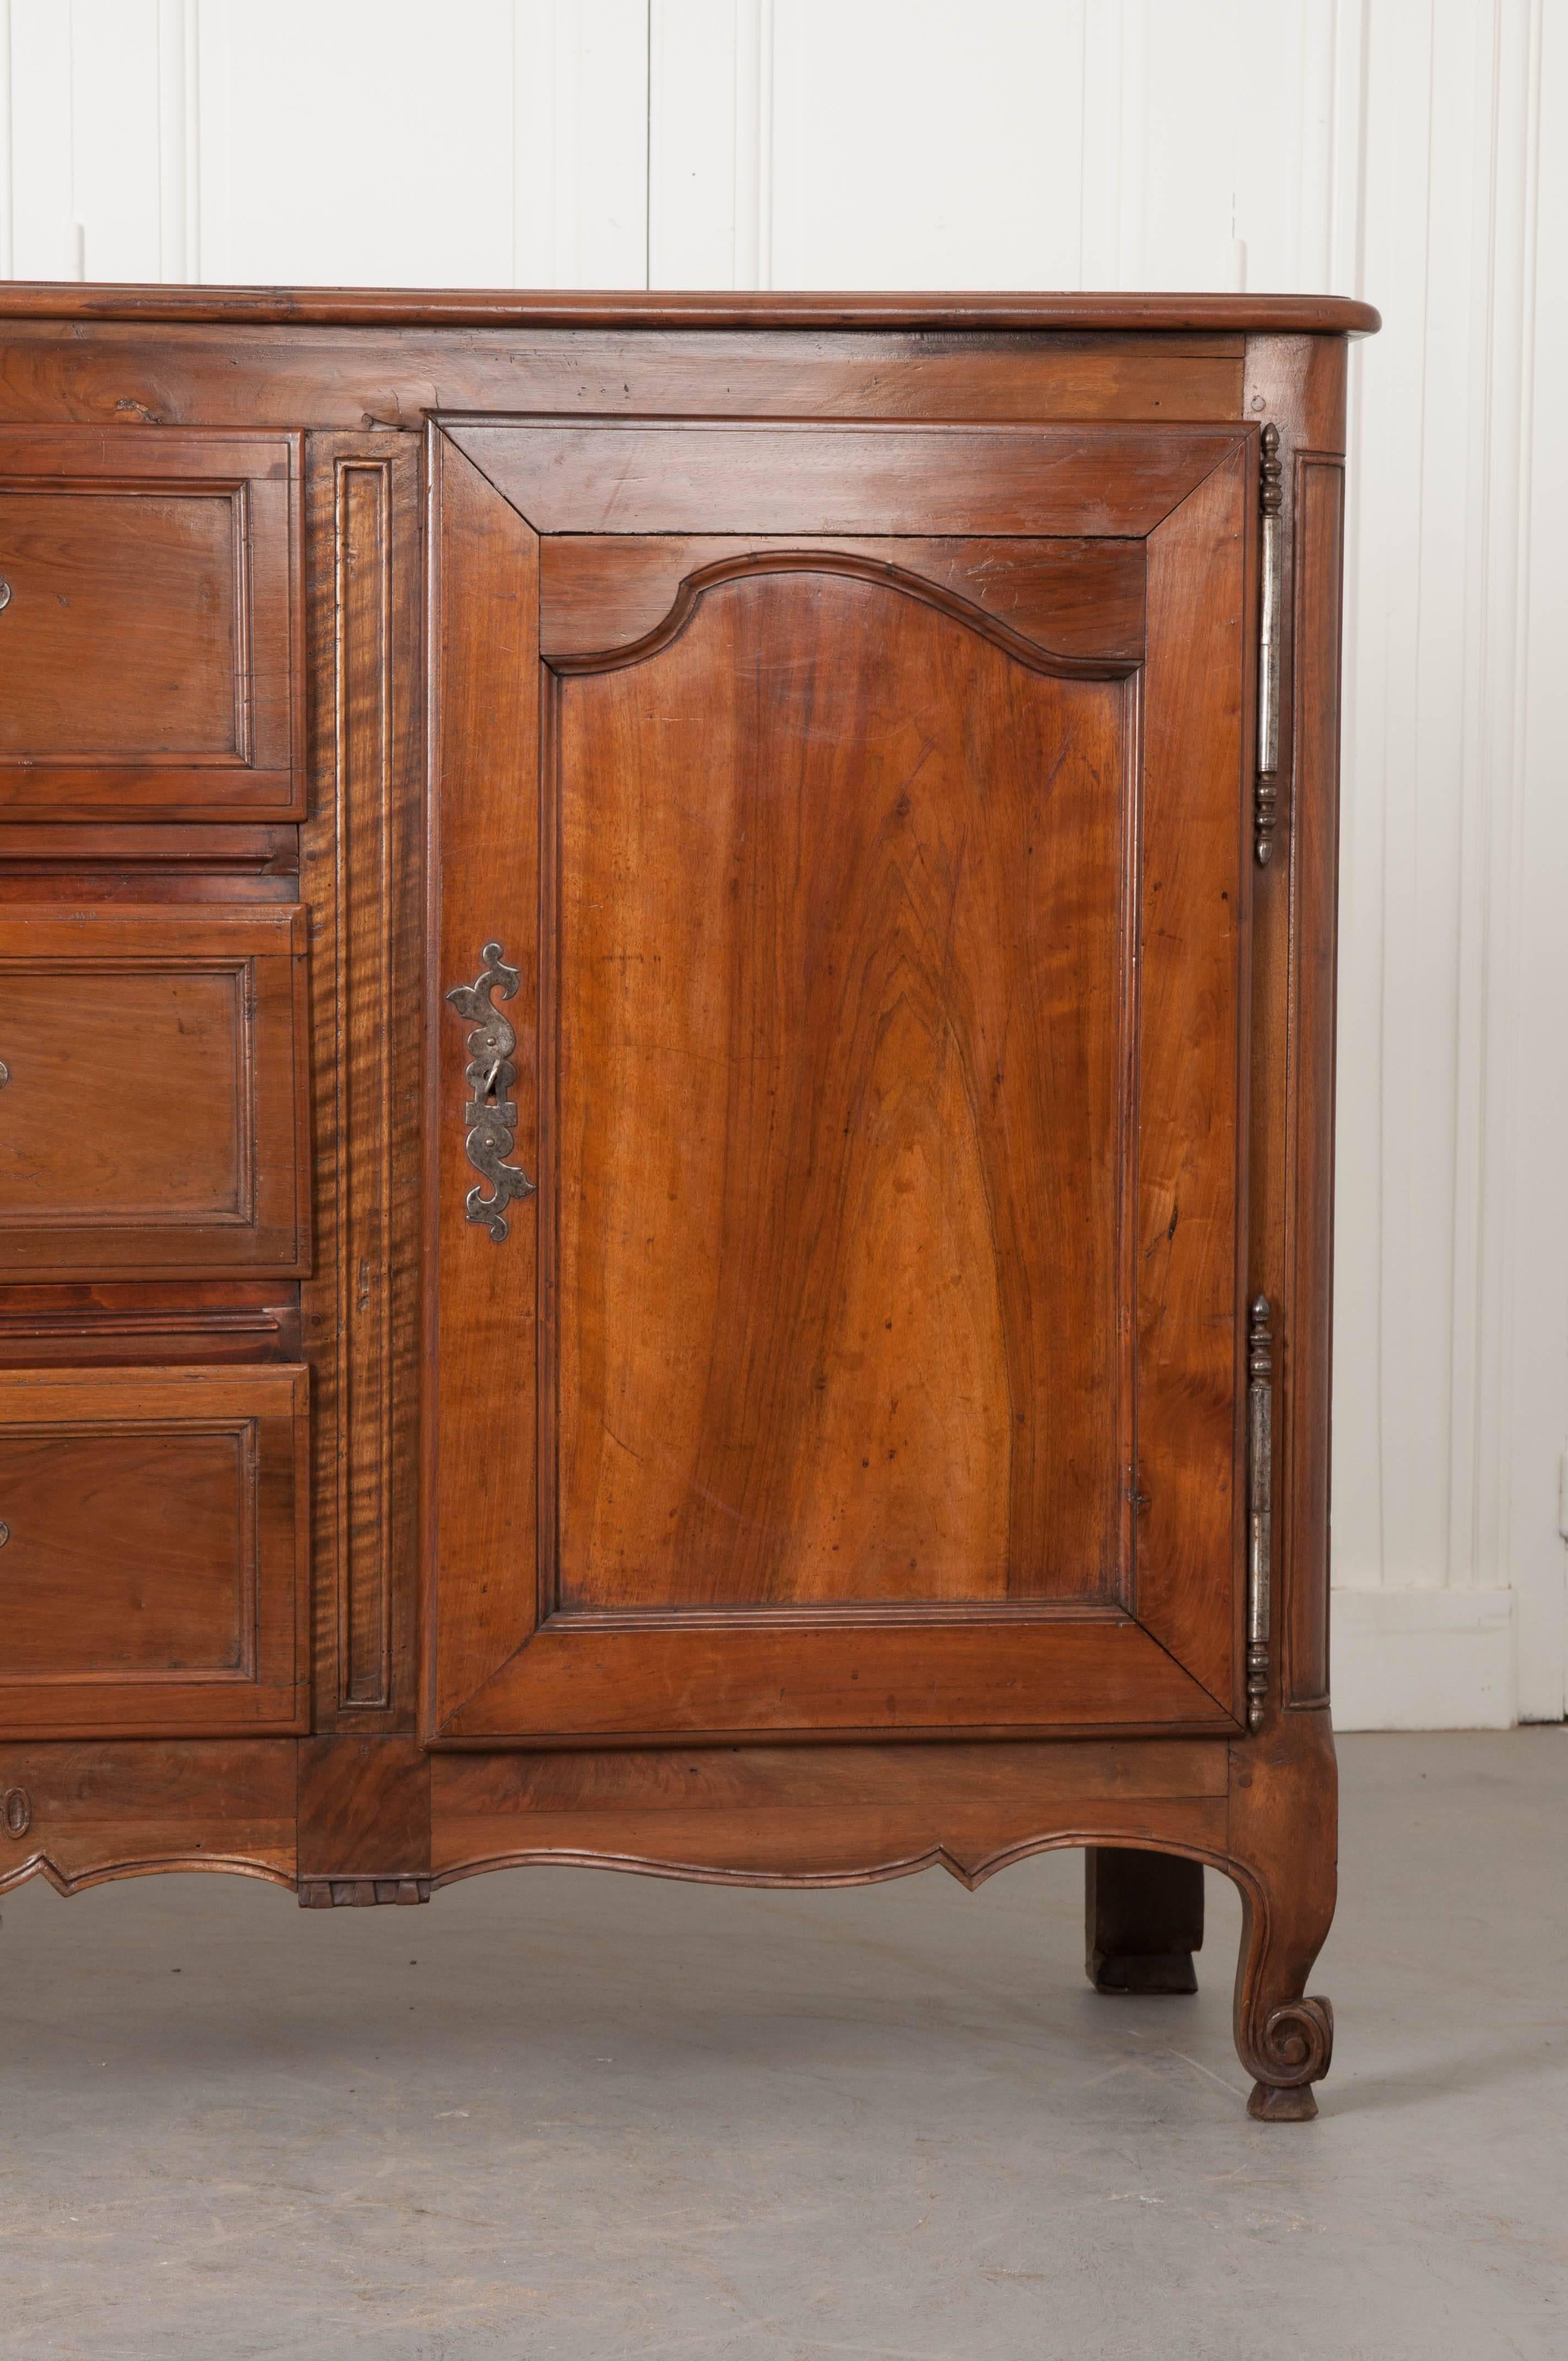 French Provincial French 19th Century Transitional Style Cherry Enfilade